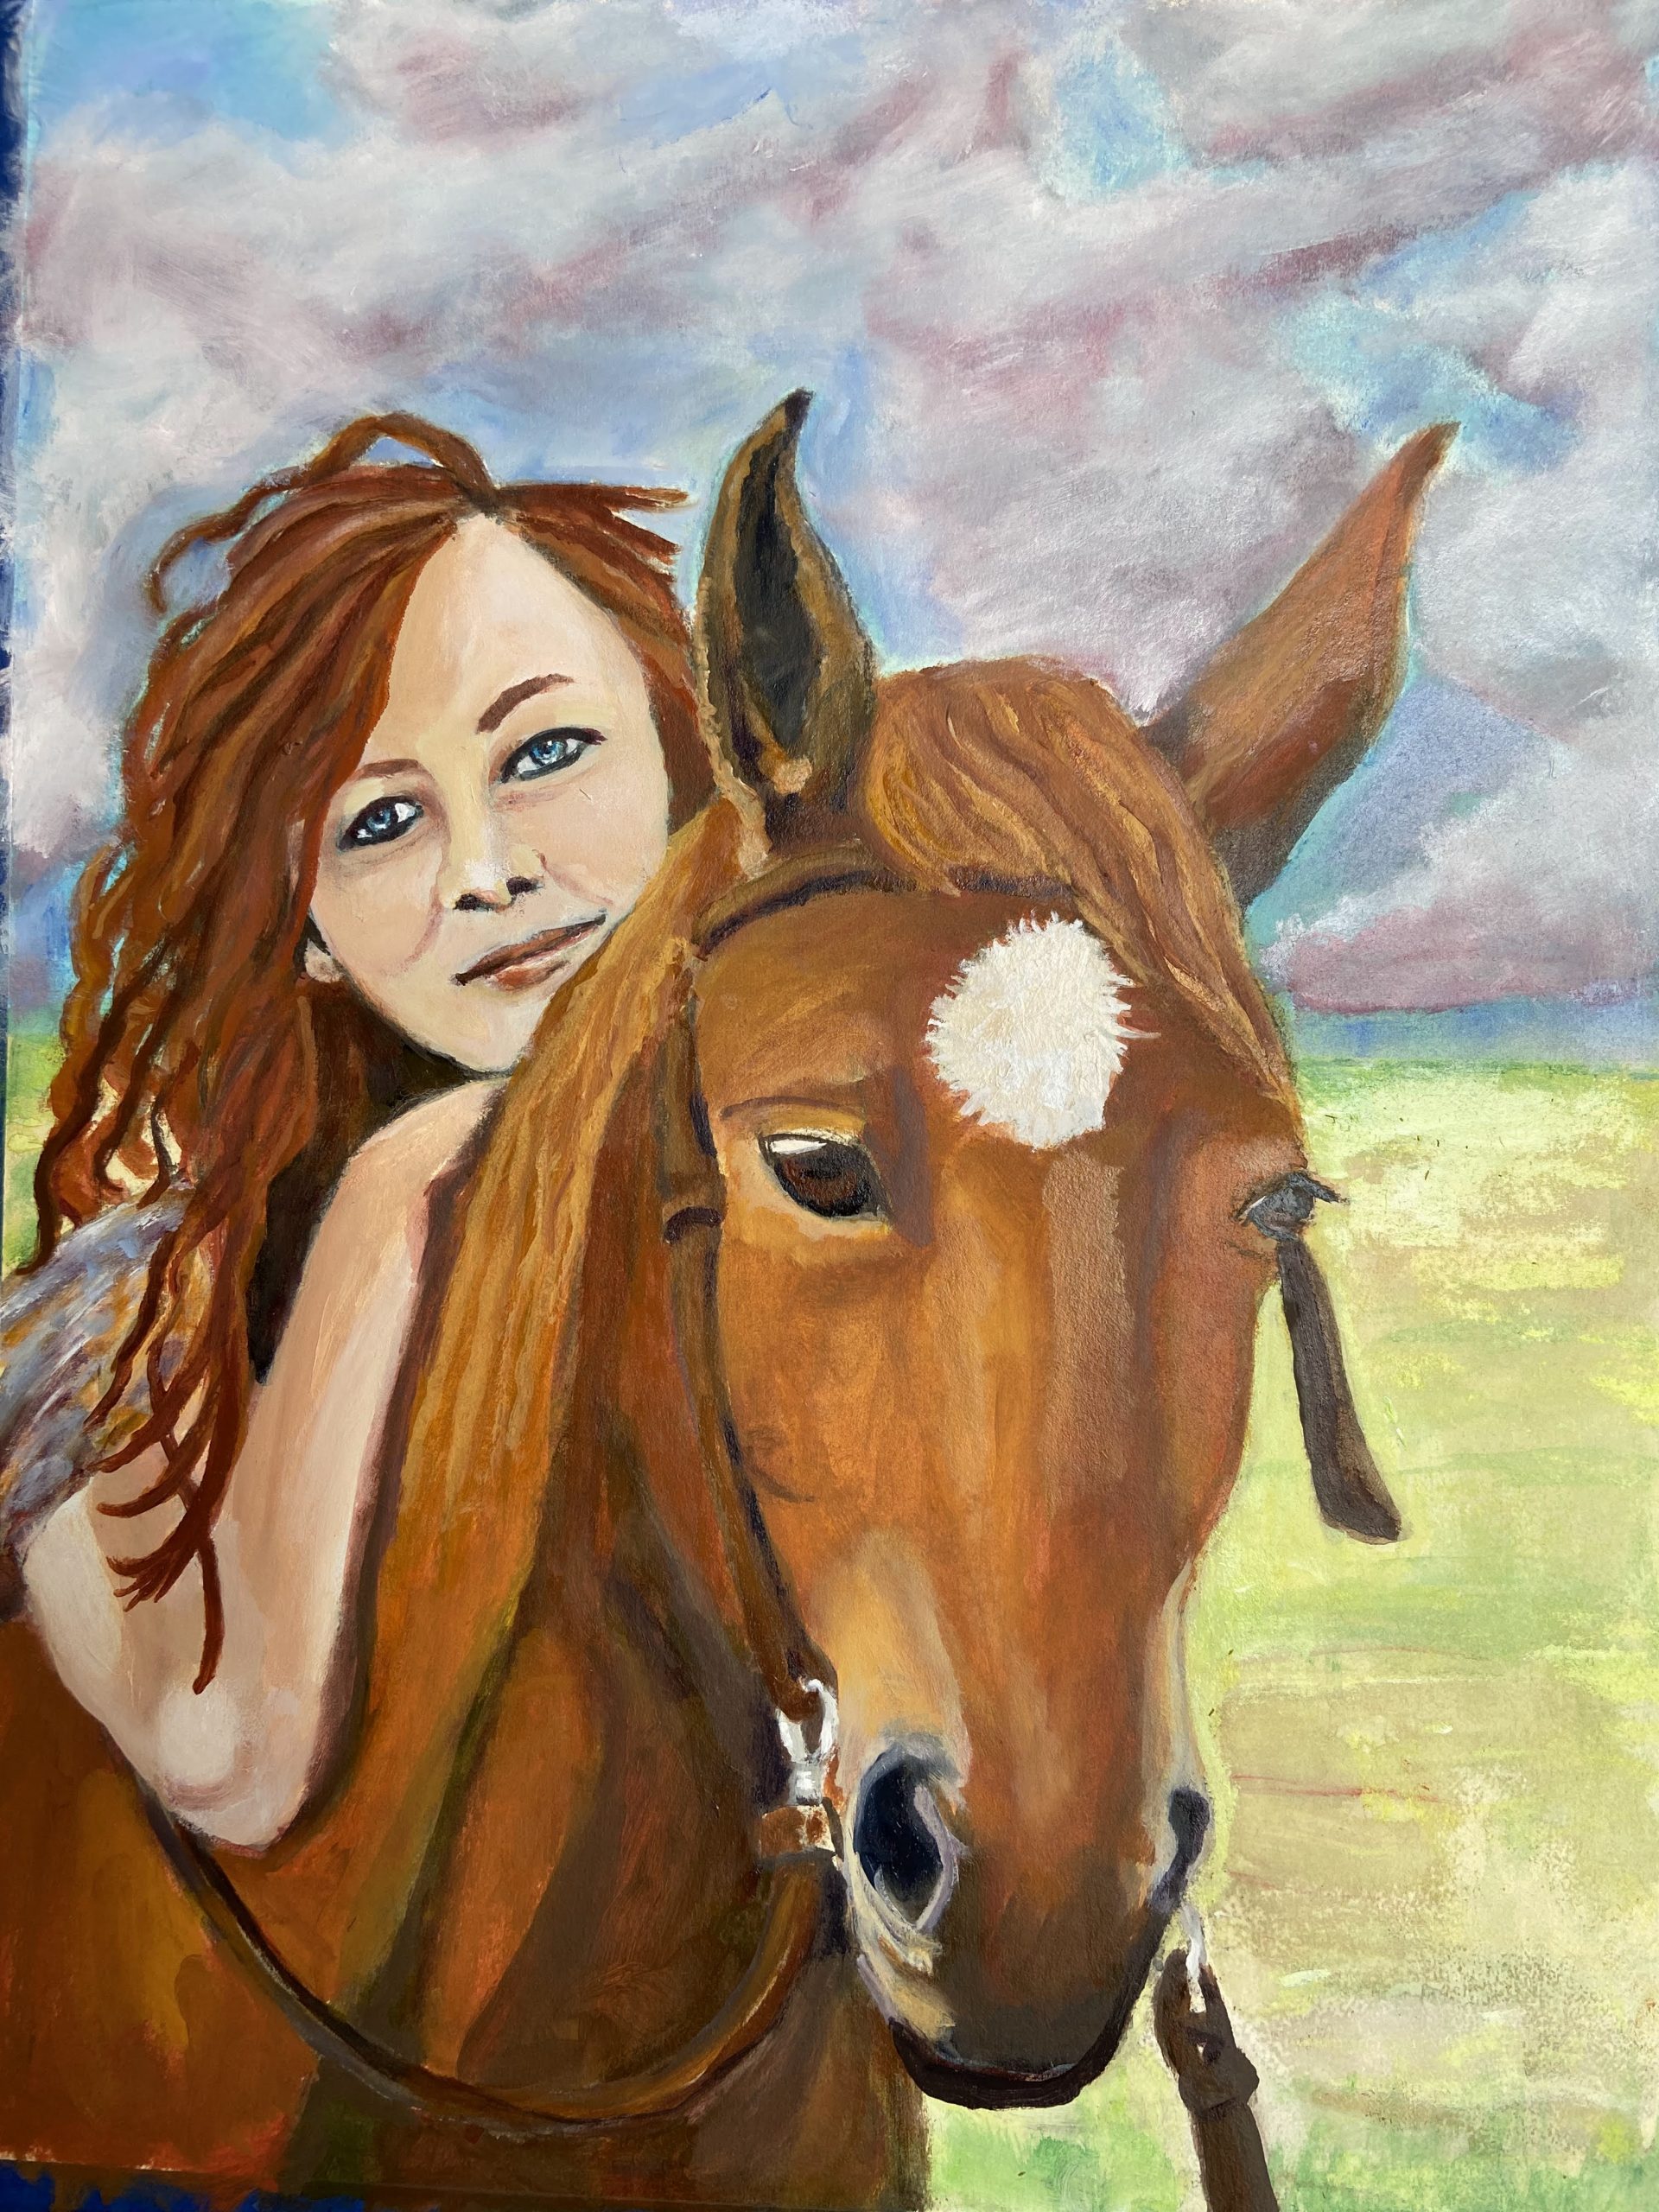 Acrylic painting of a young woman with leaning against the neck of her sorrel horse.  The sky is heavy with purple clouds